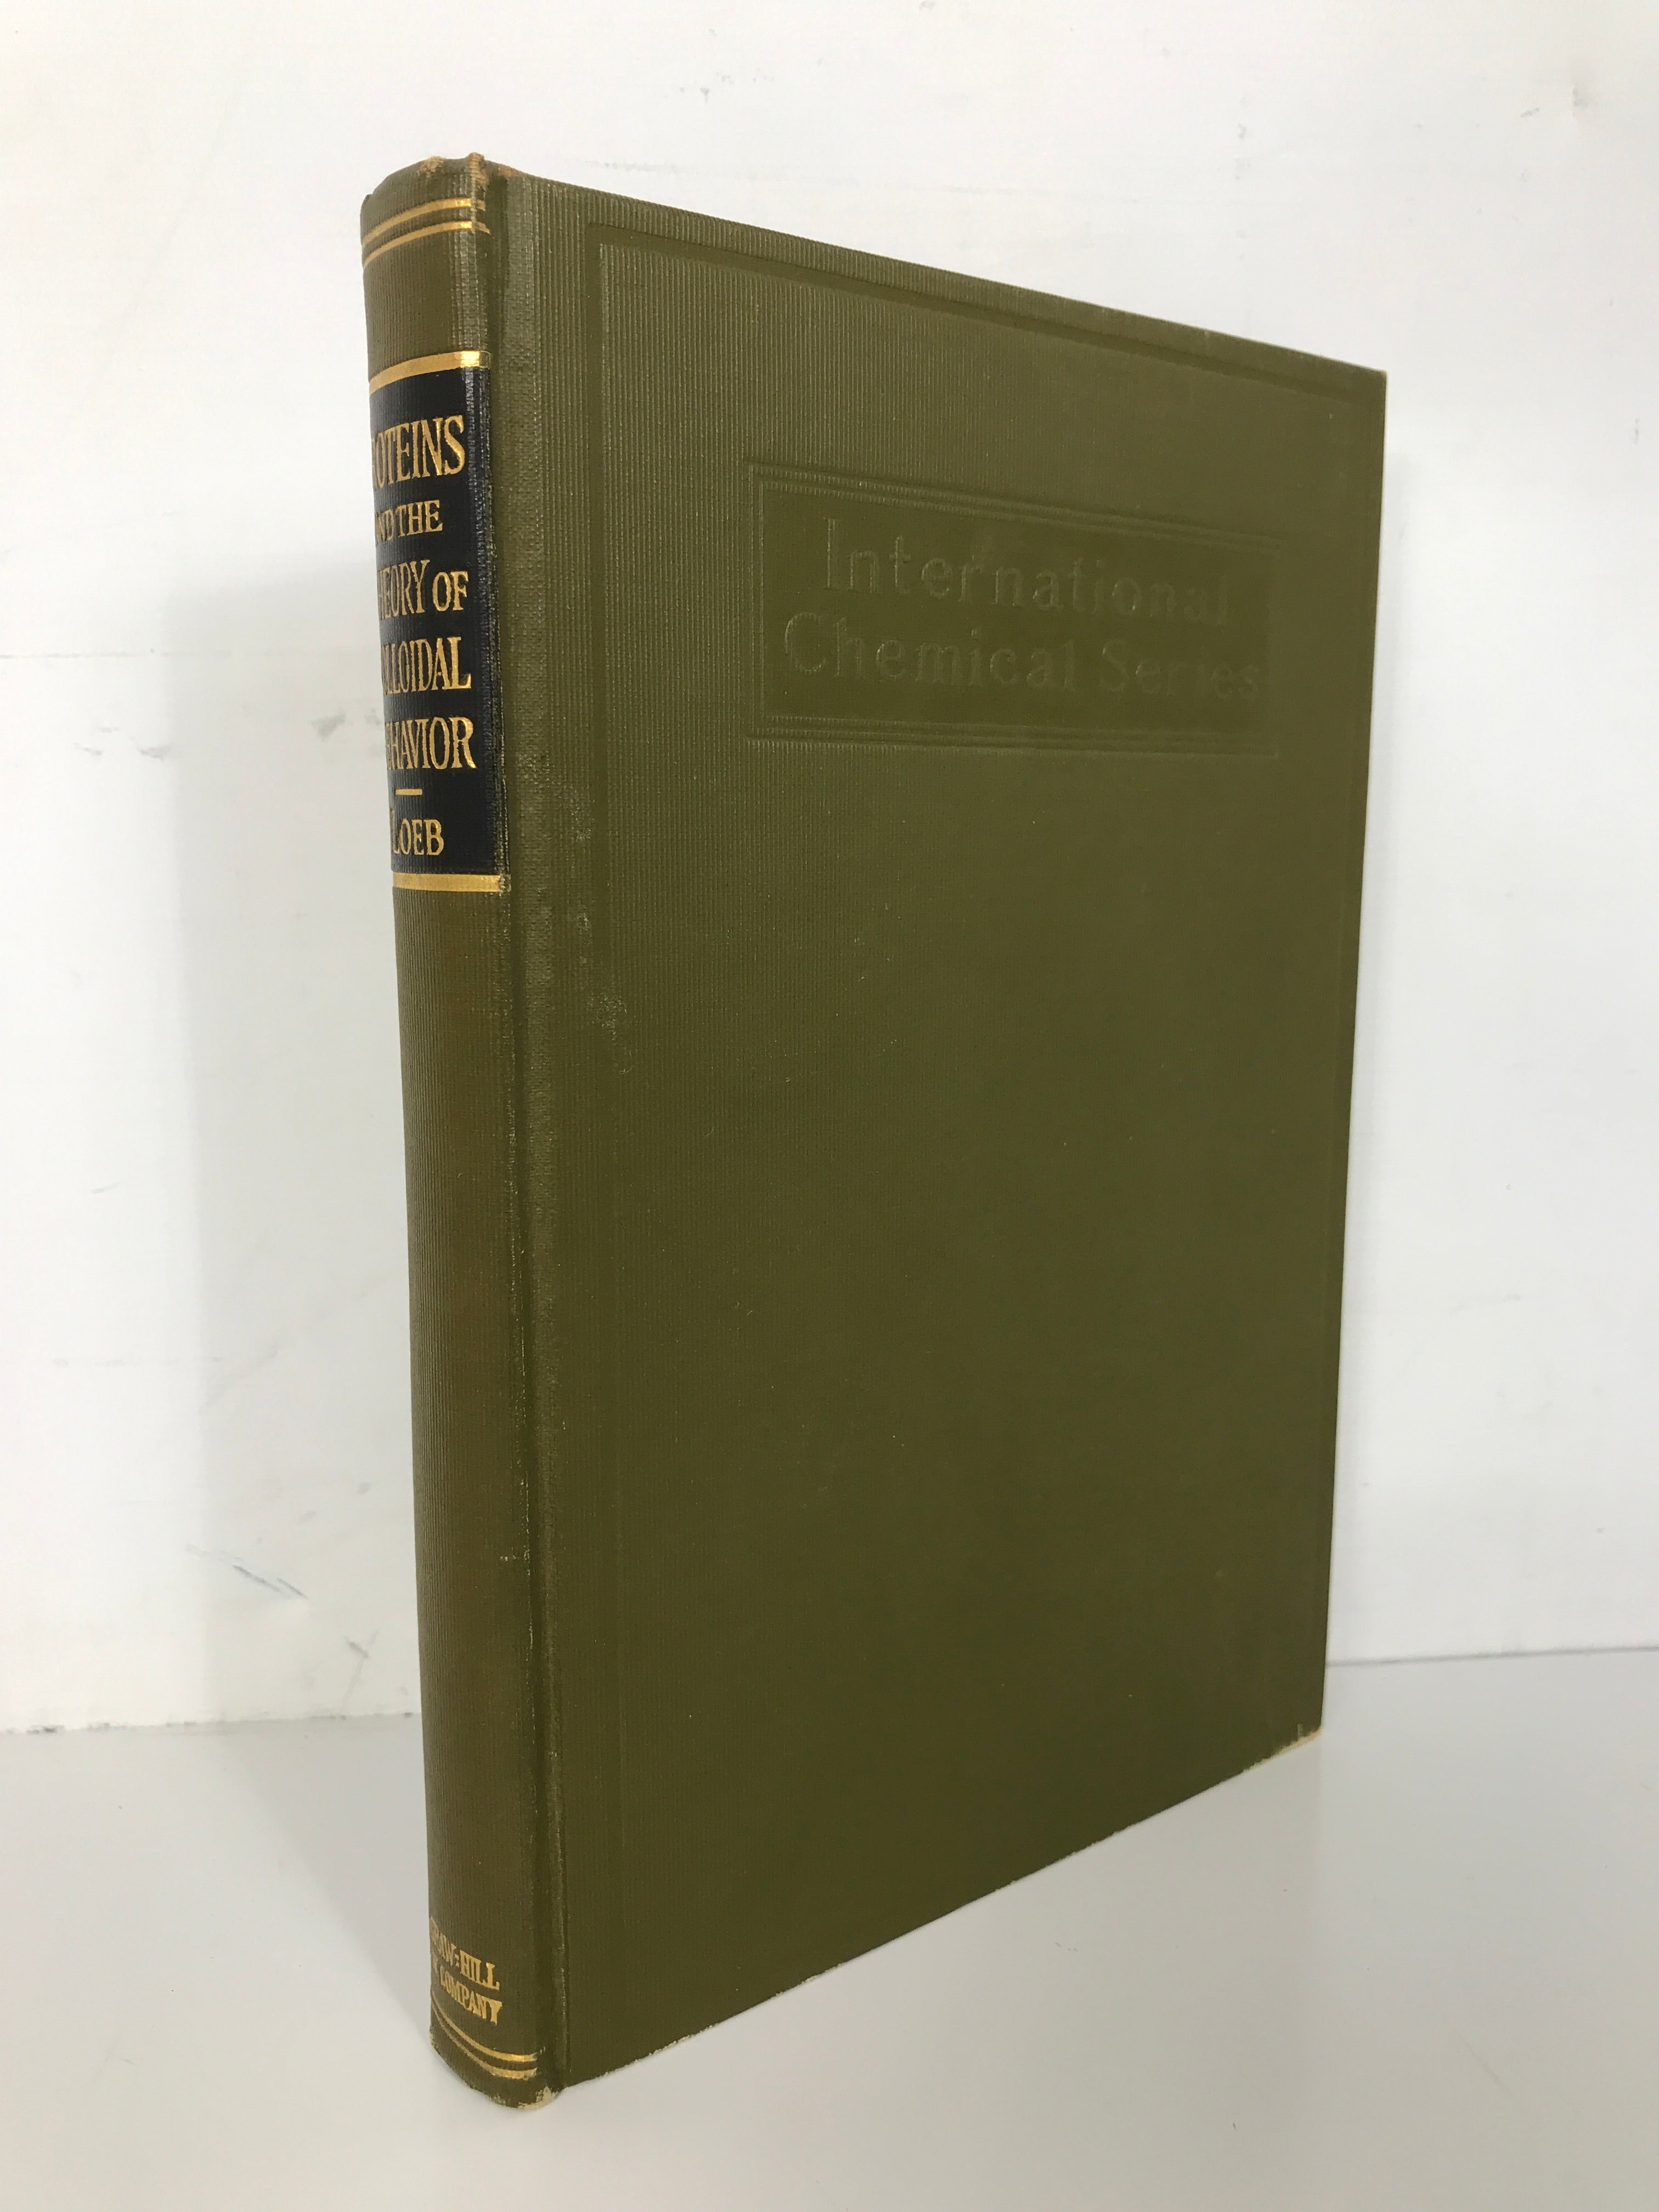 Proteins and the Theory of Colloidal Behavior by Loeb 1922 First Edition HC